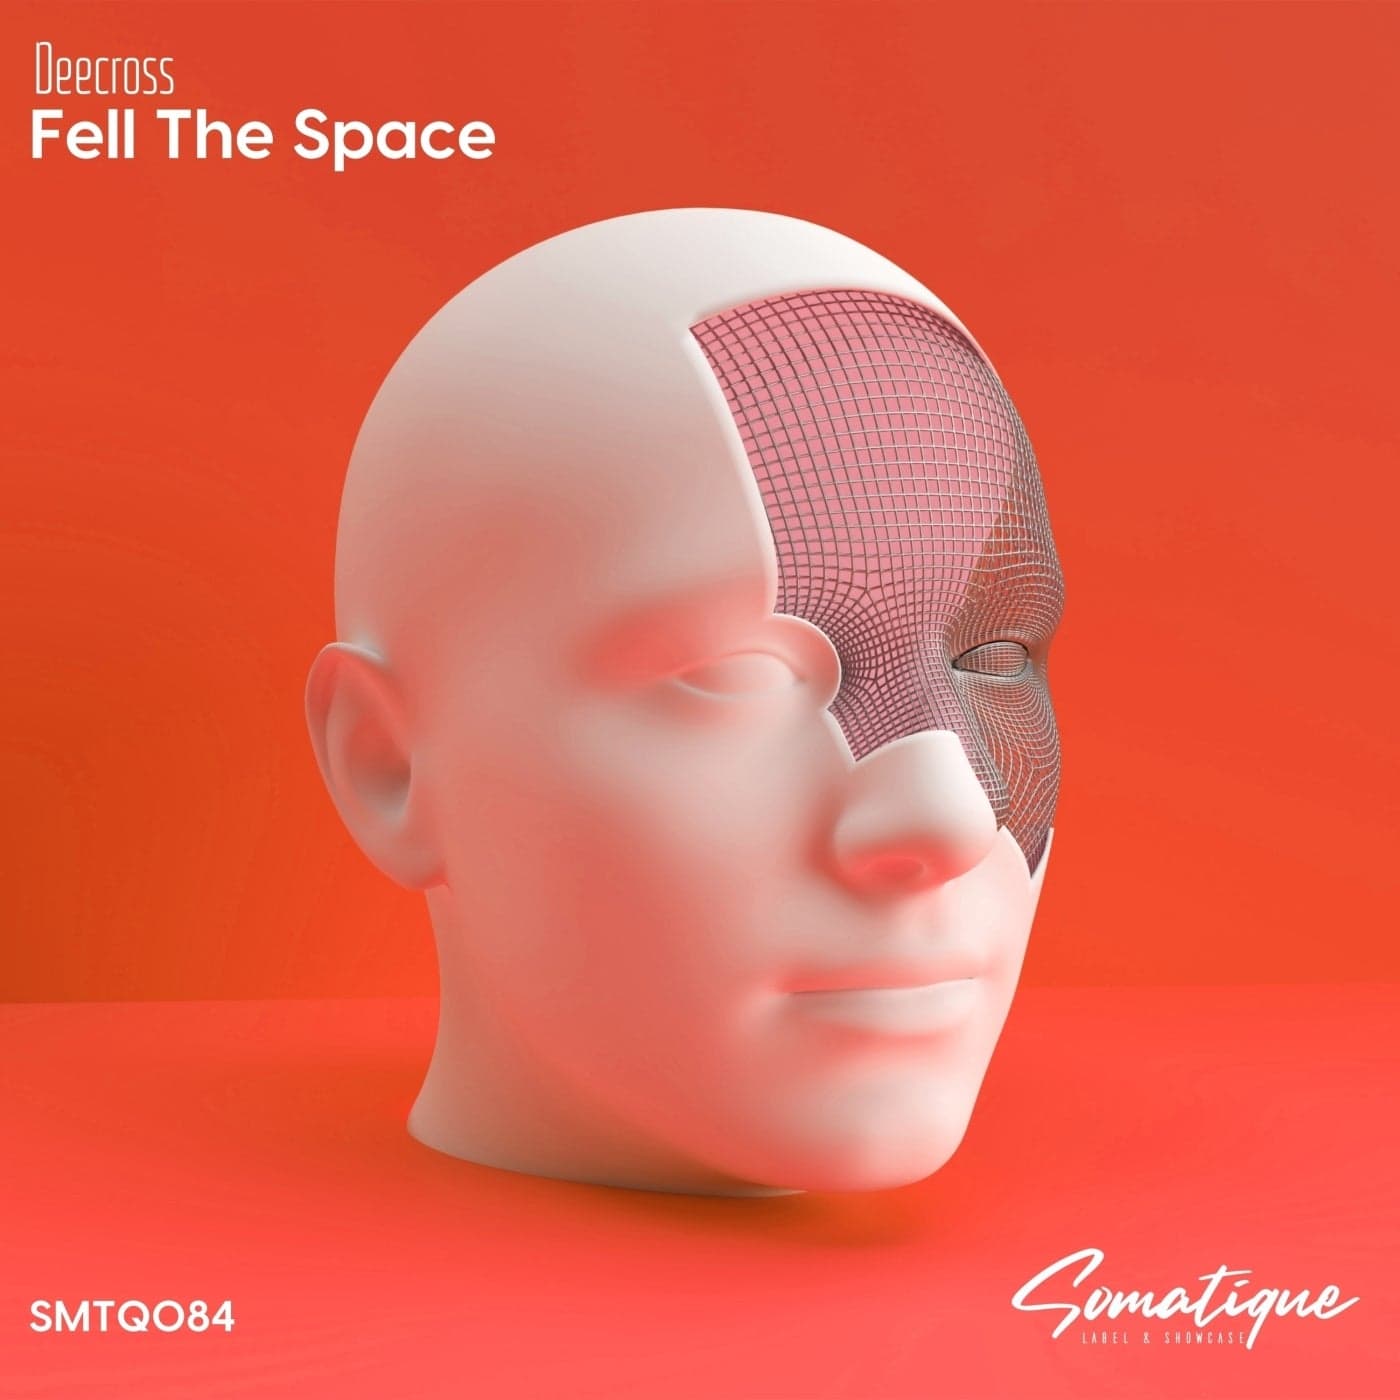 Download Deecross - Fell the Space on Electrobuzz